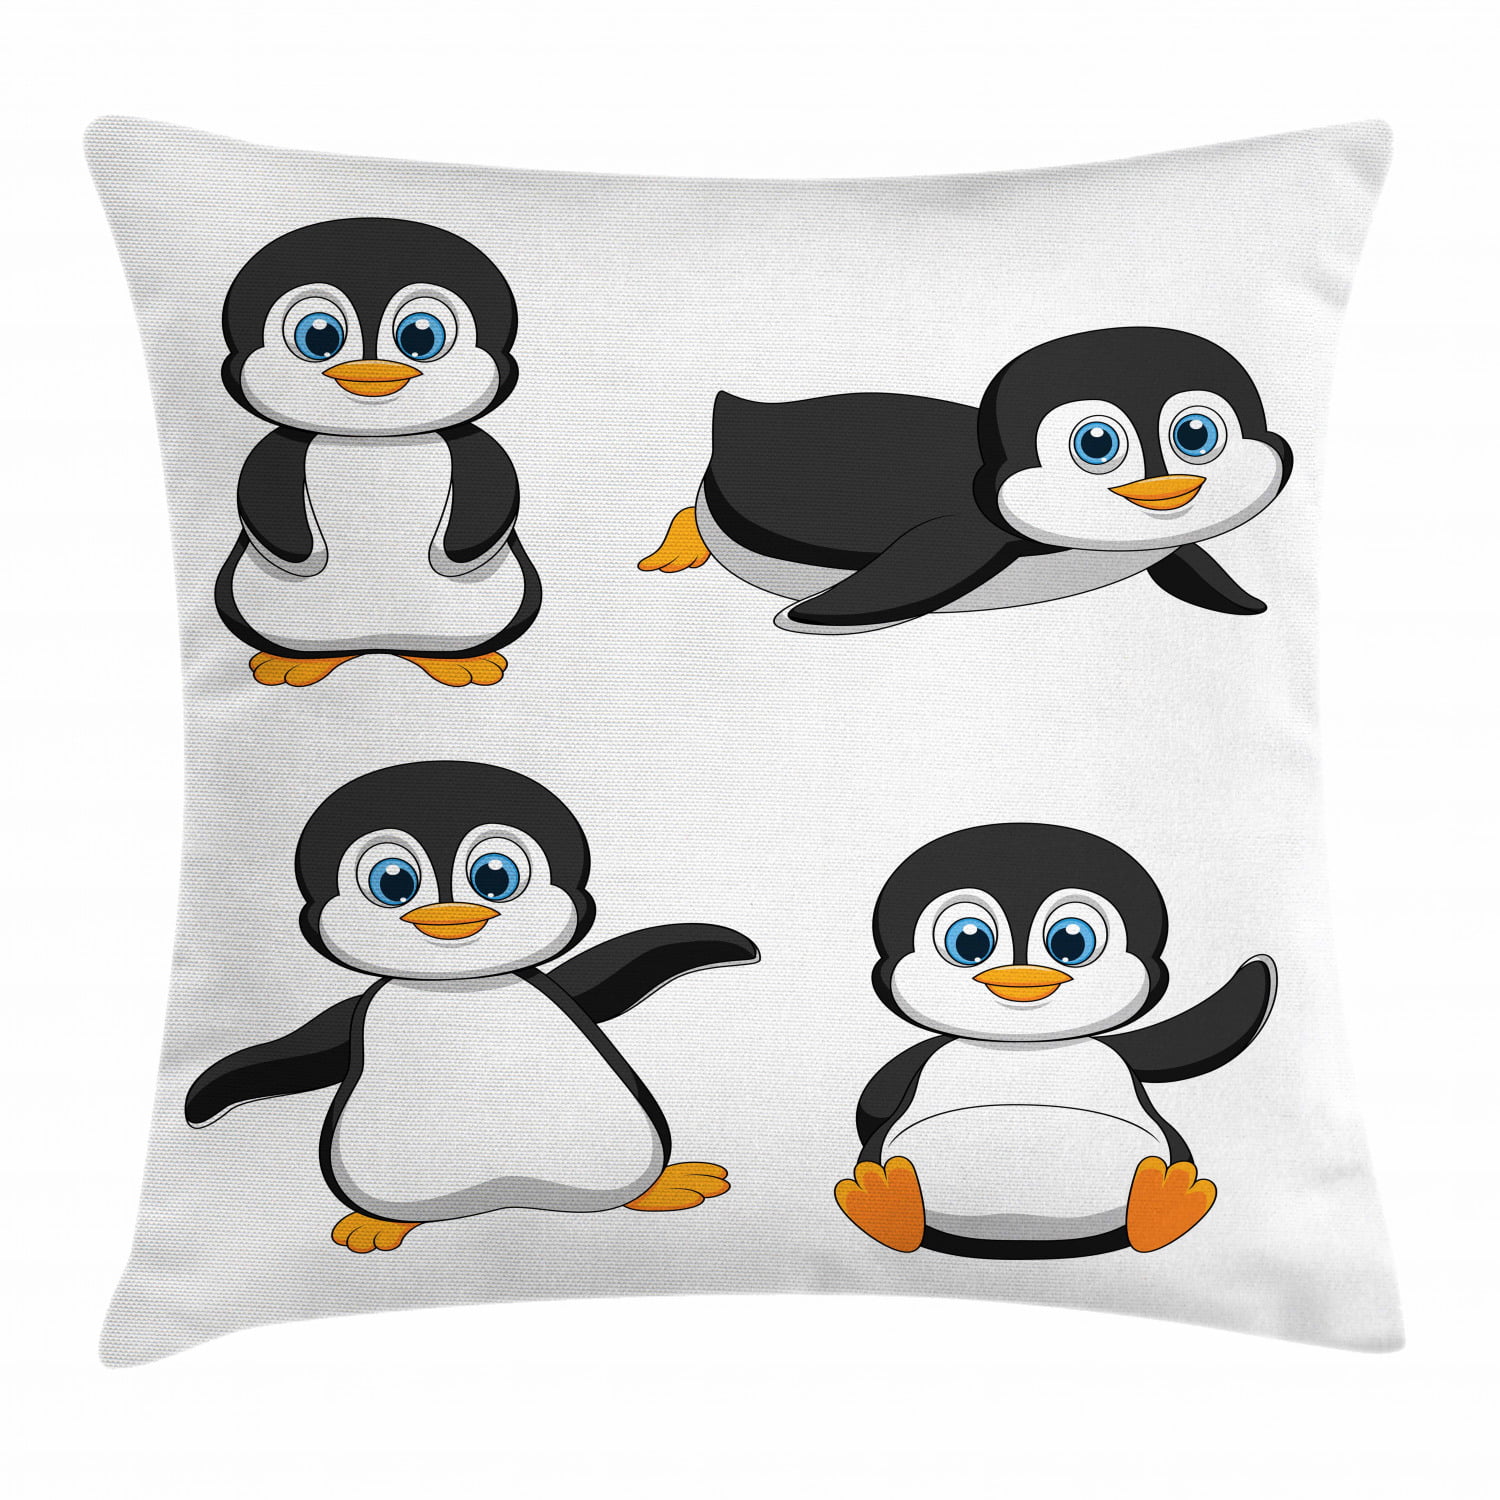 Chenille Cotton Penguin Print Square 17 X 17 Cushion Cover for Sofa Bed Couch 